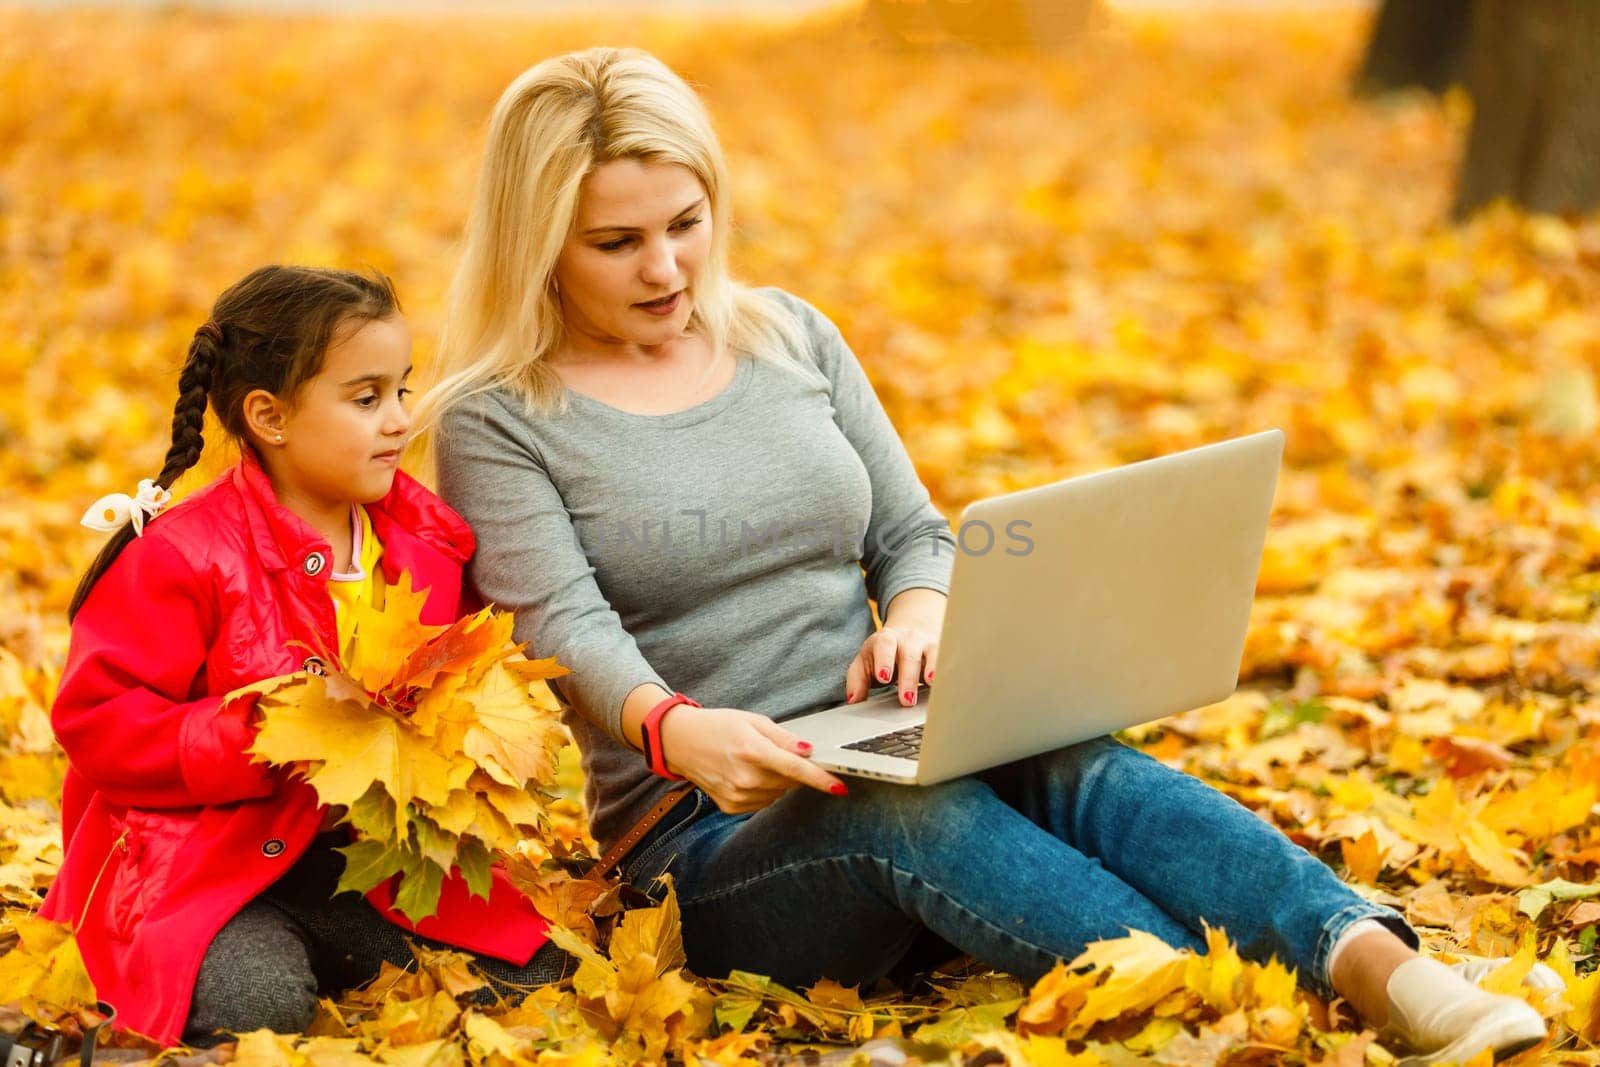 mother and daughter work on laptop outside in autumn